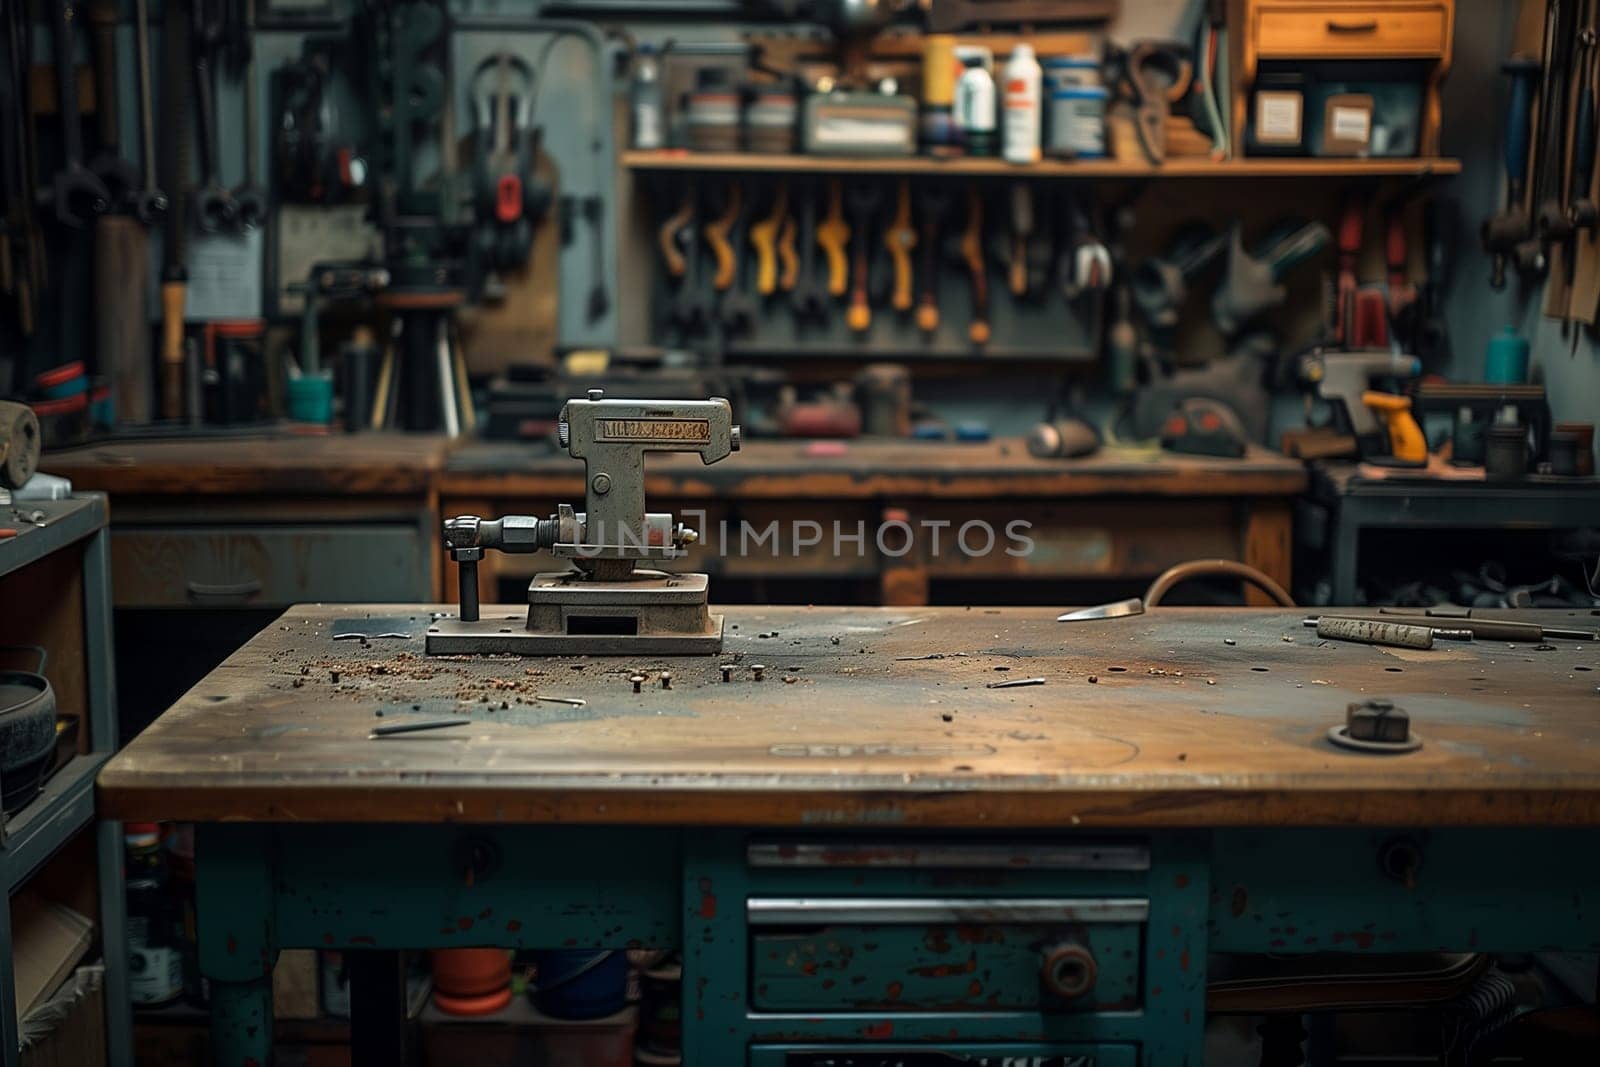 A workbench neatly arranged with an assortment of tools for various tasks.